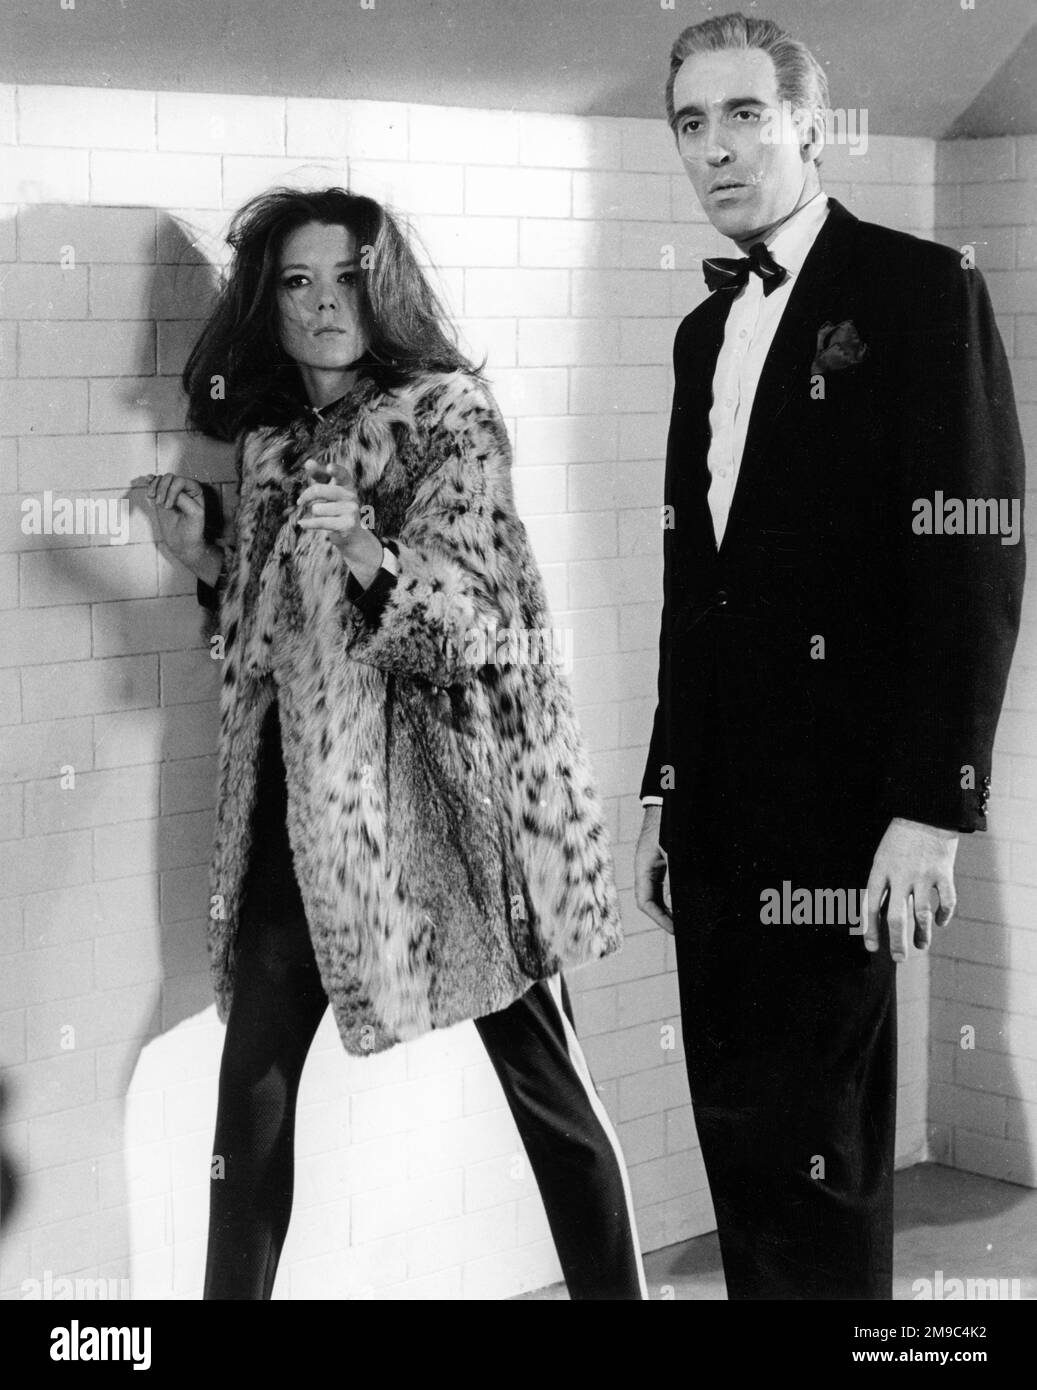 Emma Peel (played by Diana Rigg) with a male protagonist in 'The Avengers' TV series. Stock Photo